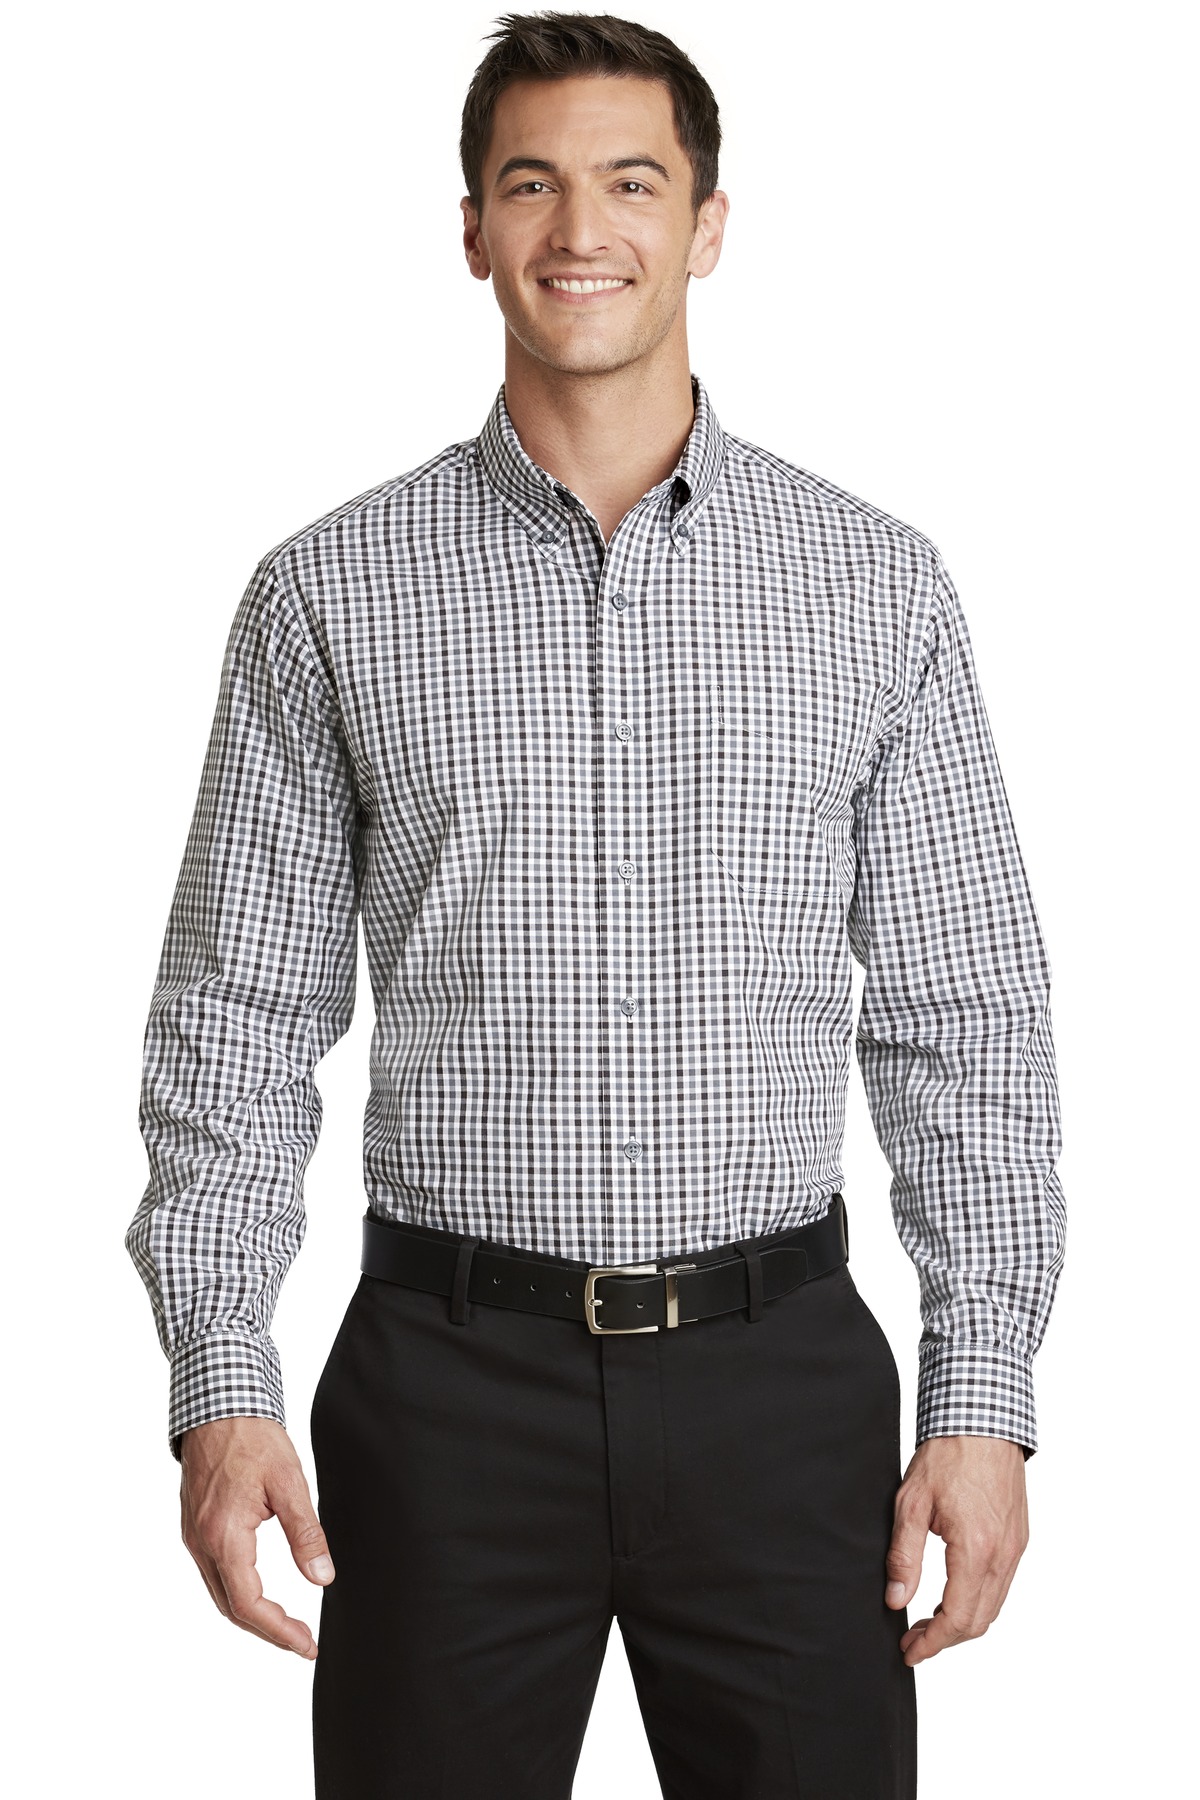 Port Authority Woven Shirts for Hospitality ® Long Sleeve Gingham Easy Care Shirt.-Port Authority